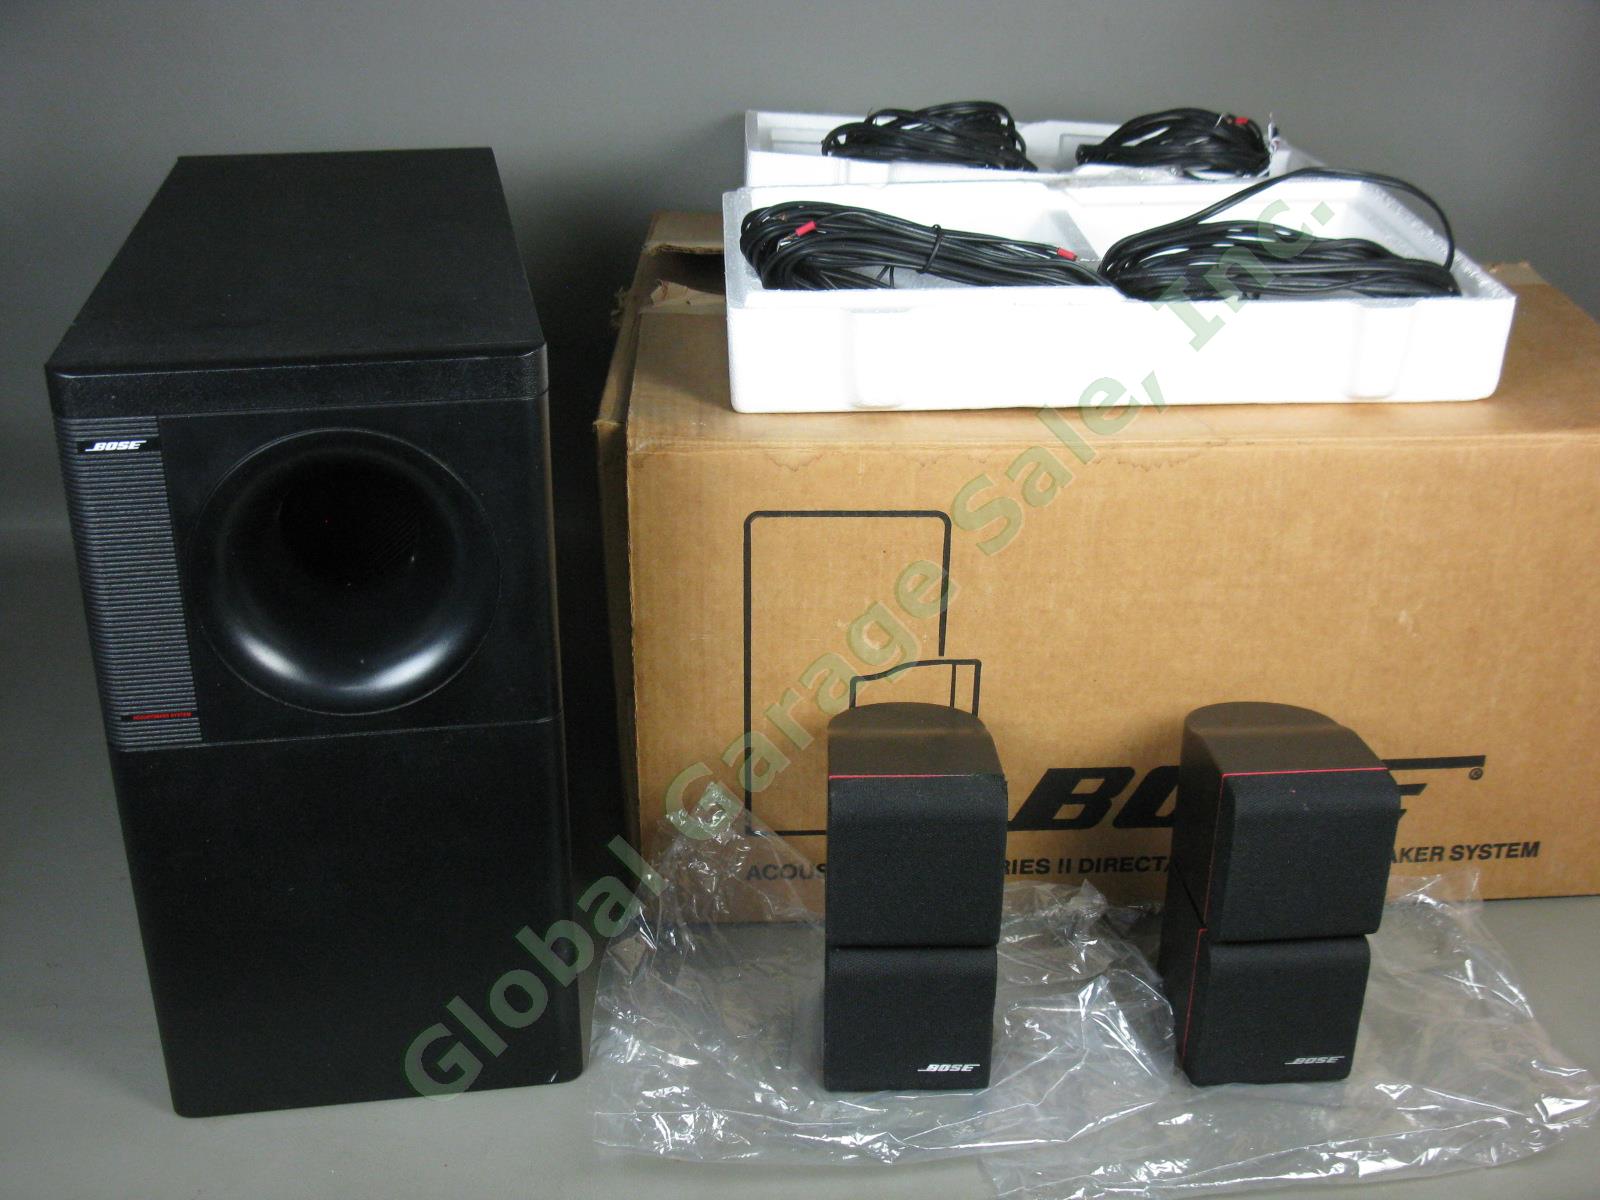 Bose Acoustimass 5 Series II Stereo Speaker System Black One Owner Exc Cond NR!